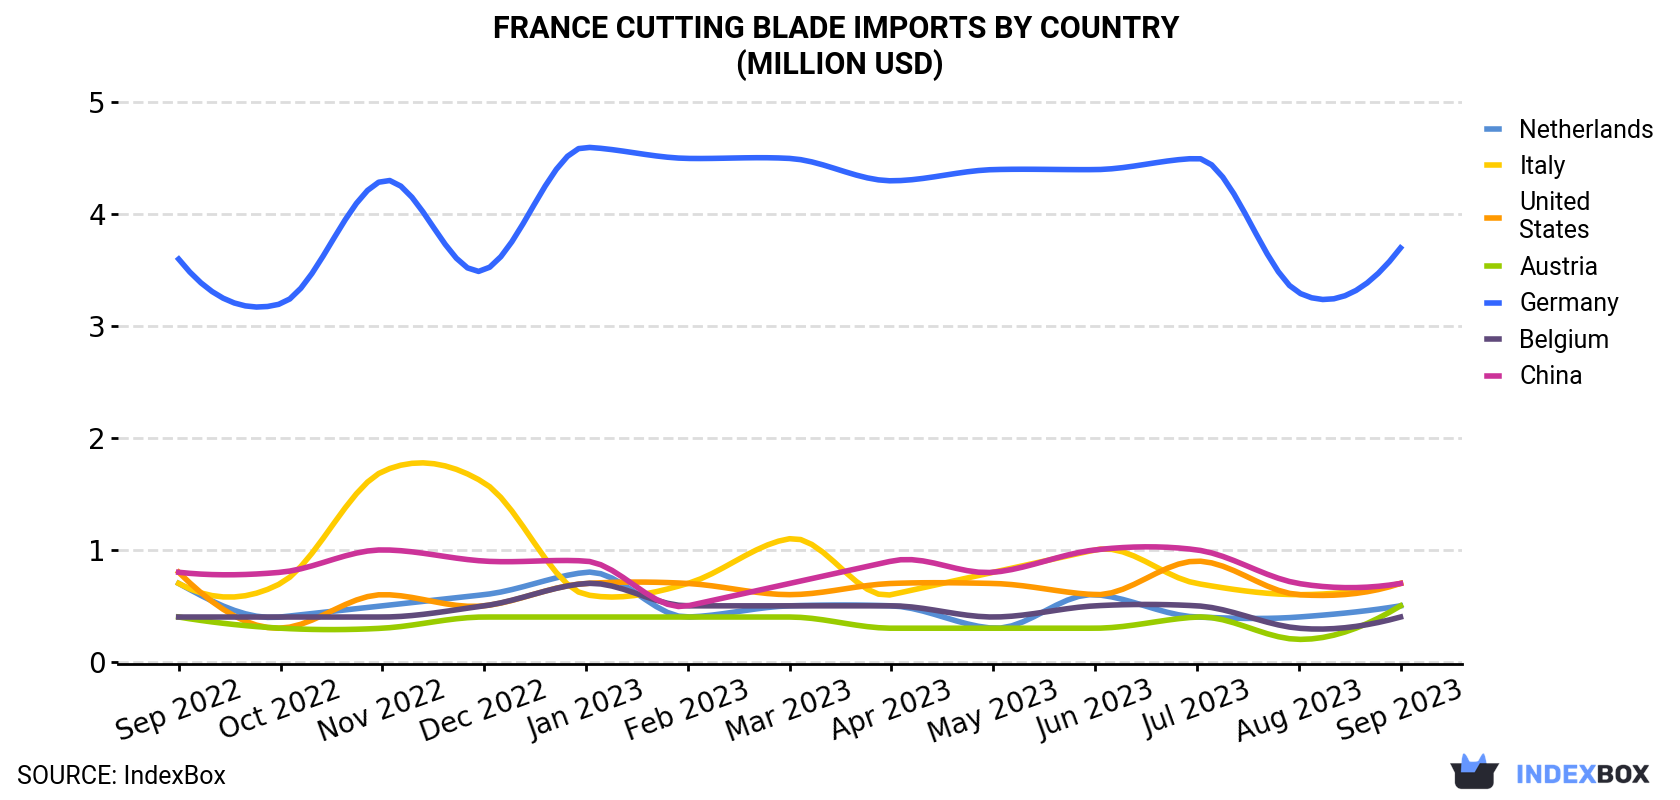 France Cutting Blade Imports By Country (Million USD)